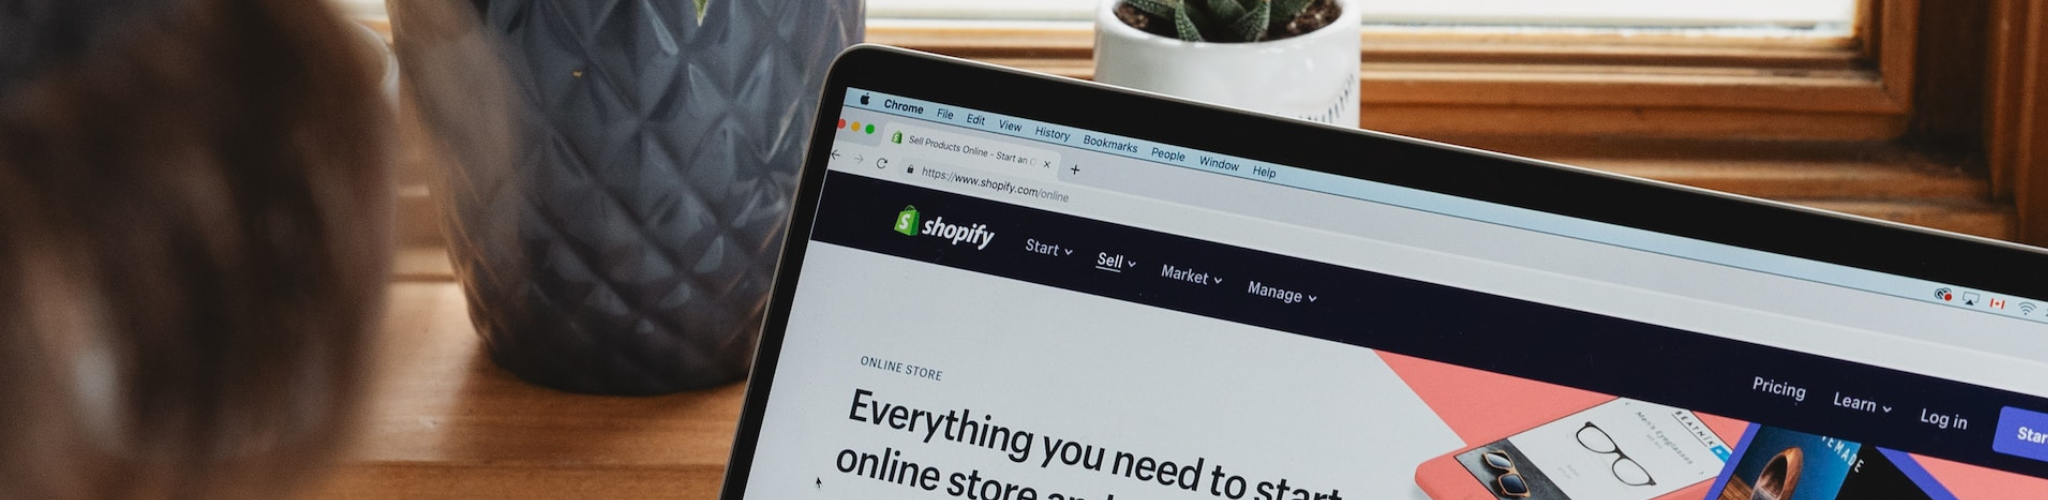 Integrating Shopify and EDI with your retail customers: What you need to know